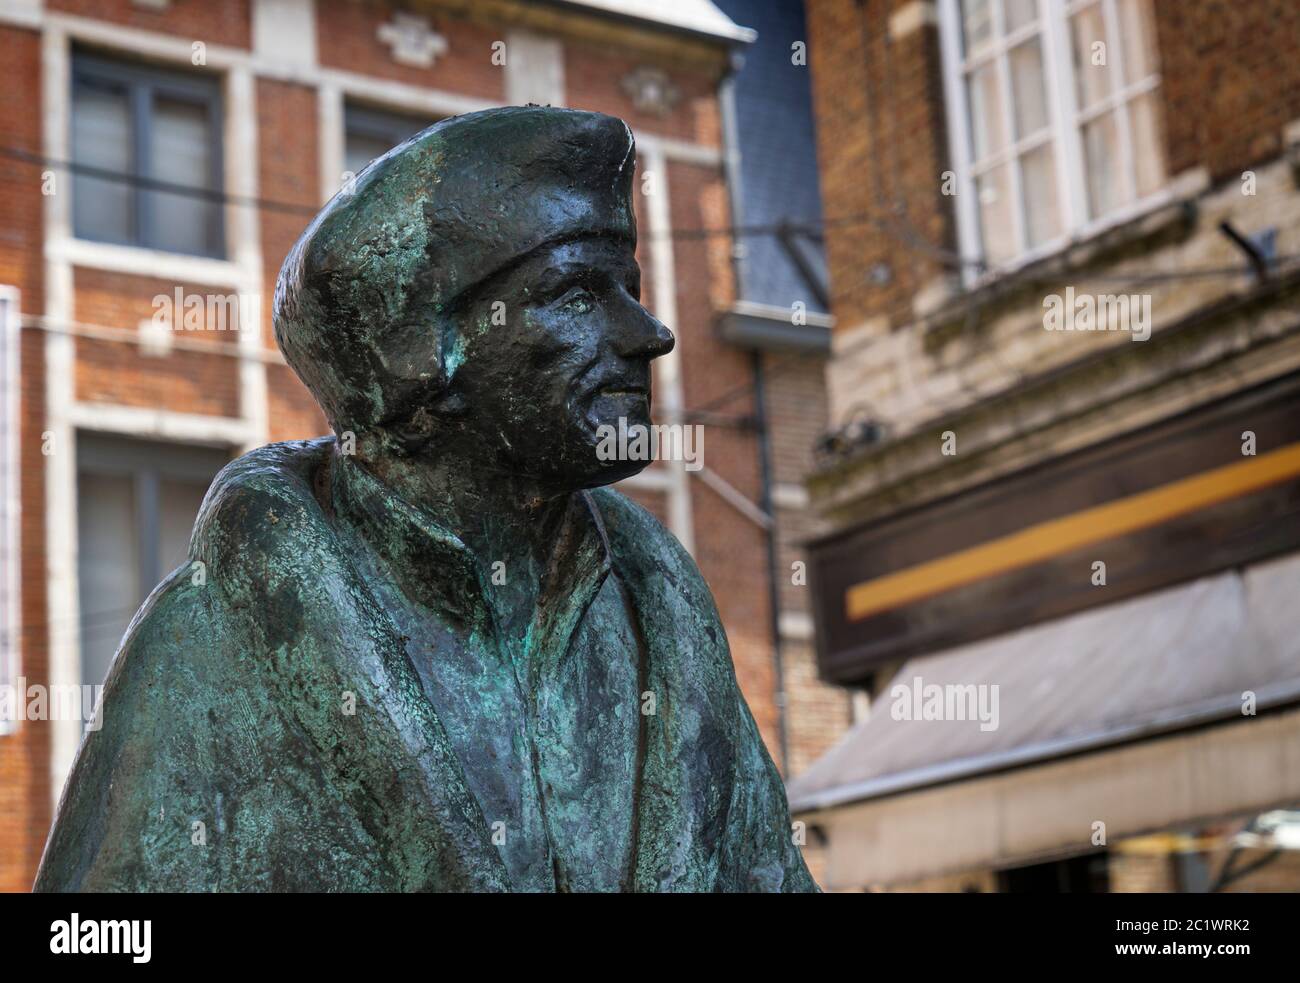 Ancient statue of the philosopher and theologian Erasmus of Rotterdam in the Belgian city of Leuven. Stock Photo